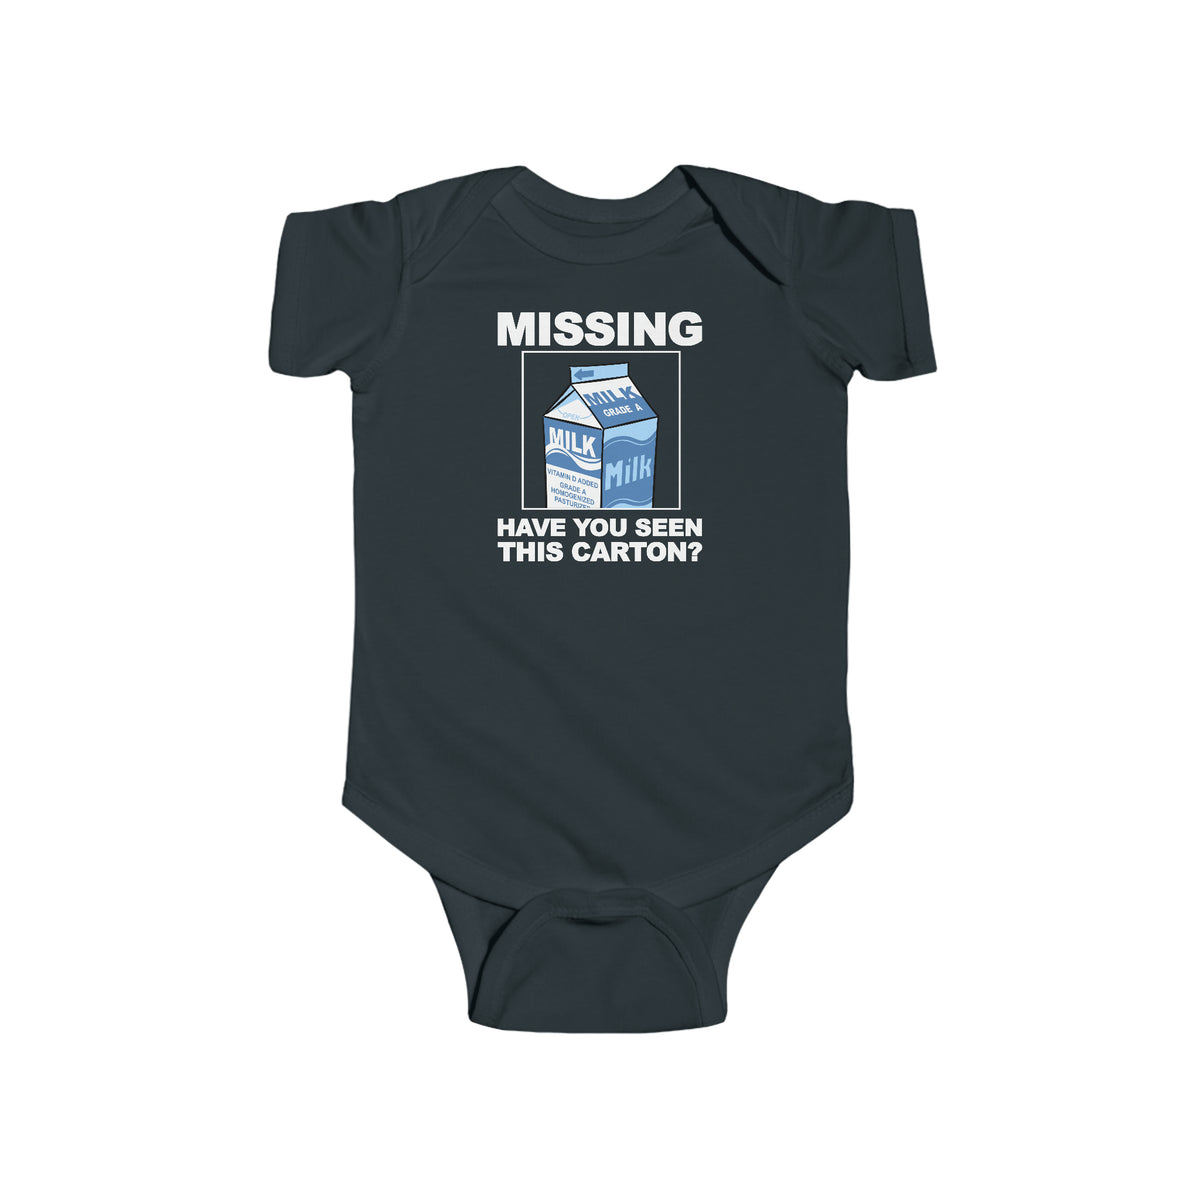 Missing - Have You Seen This Carton? - Baby Onesie